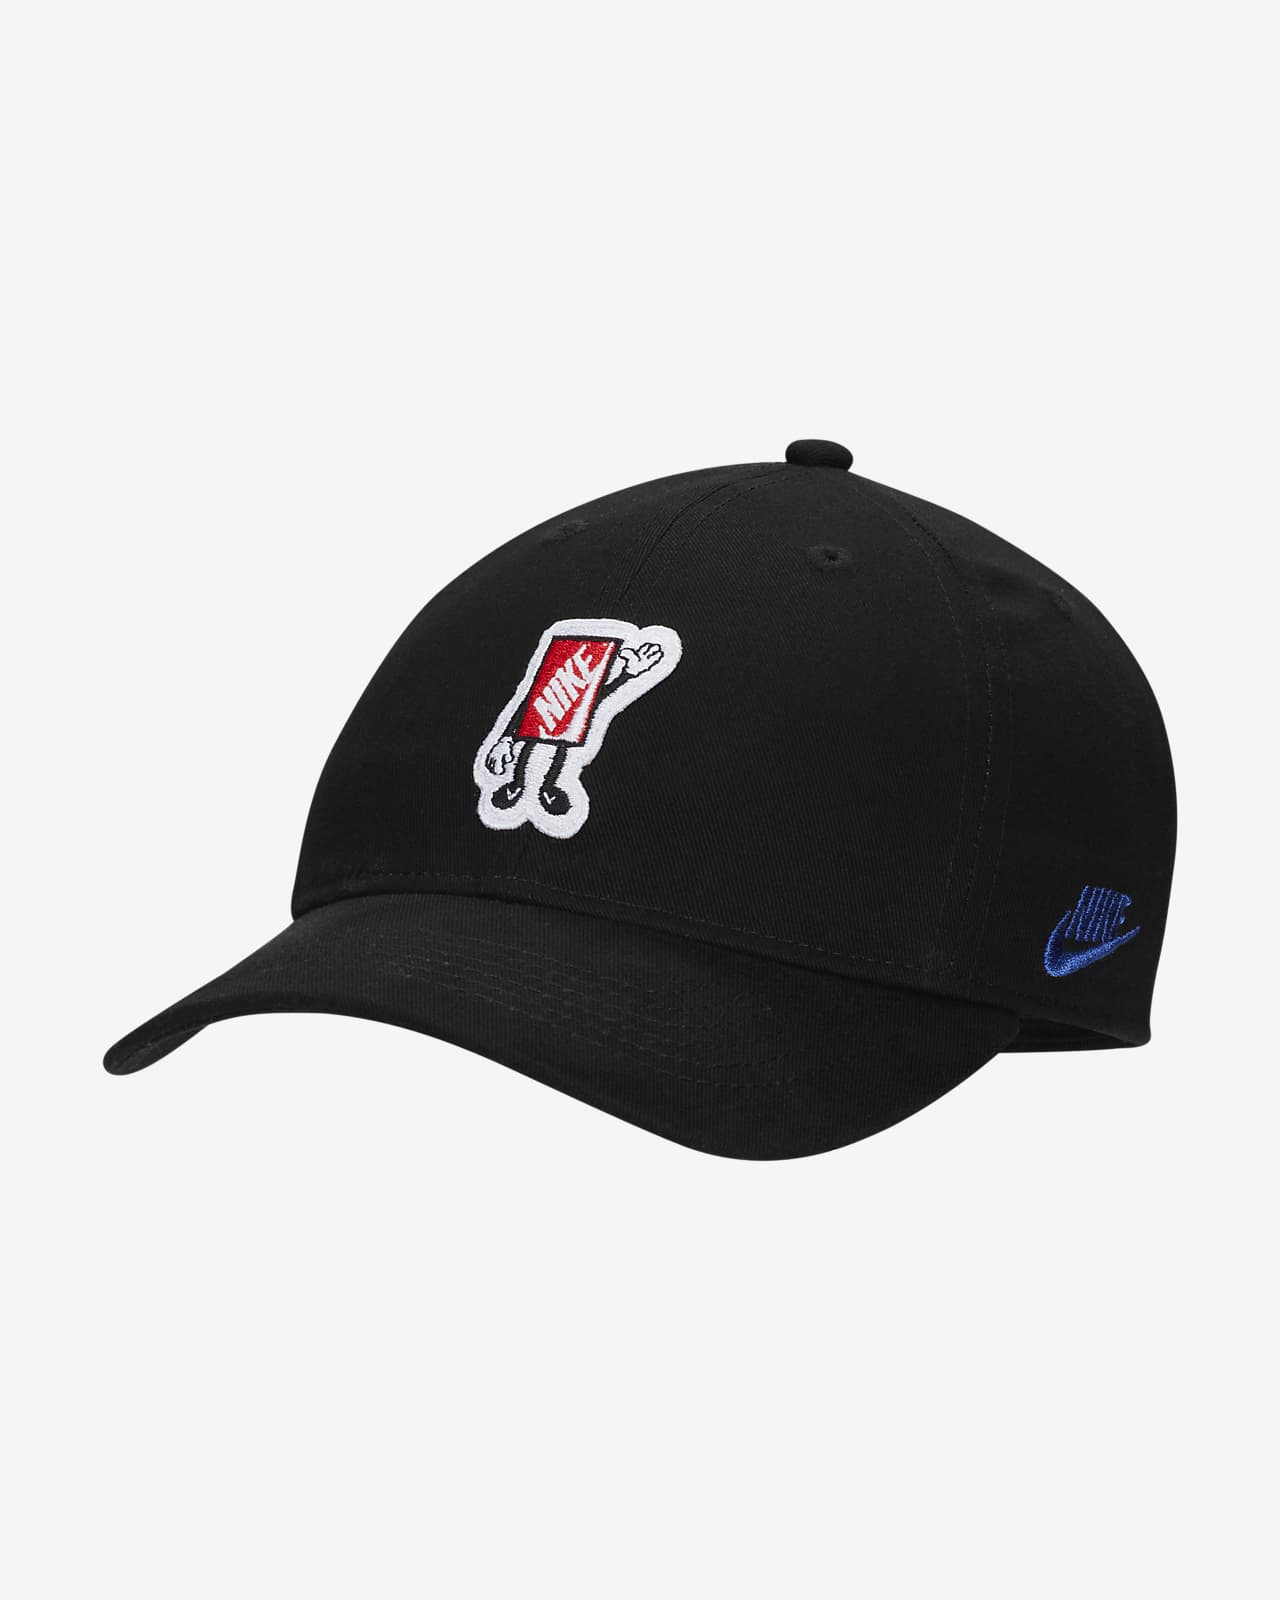 Nike Boxy Curved Cap Little Kids Hat.